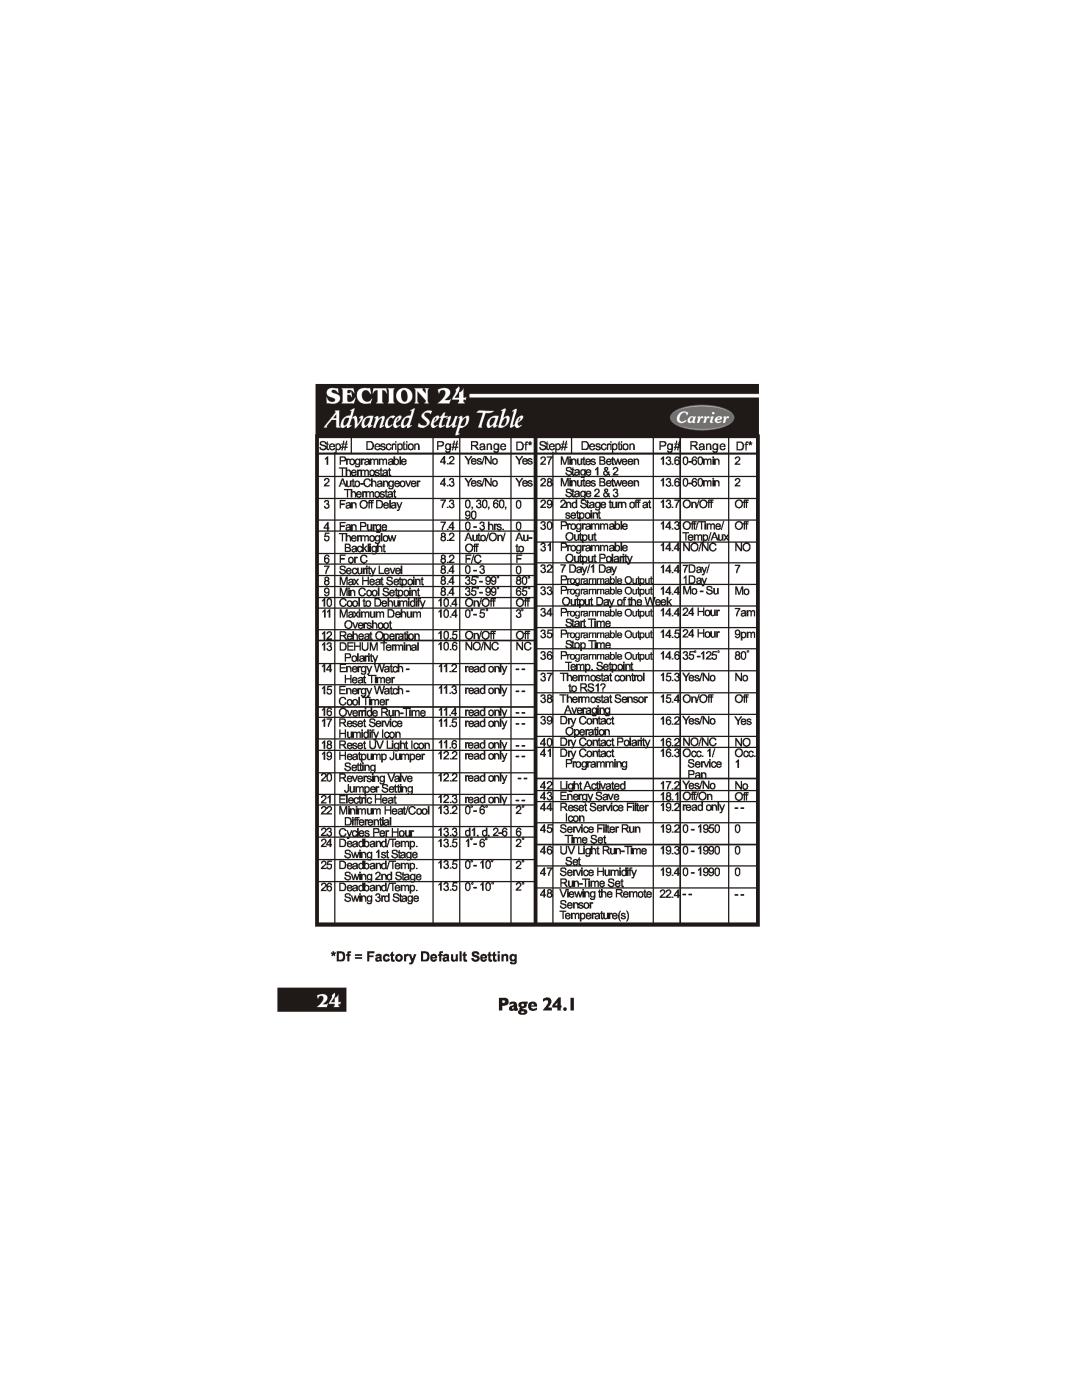 Carrier 33CS450-01 owner manual Advanced Setup Table, Section, Page, Carrier, Df = Factory Default Setting 